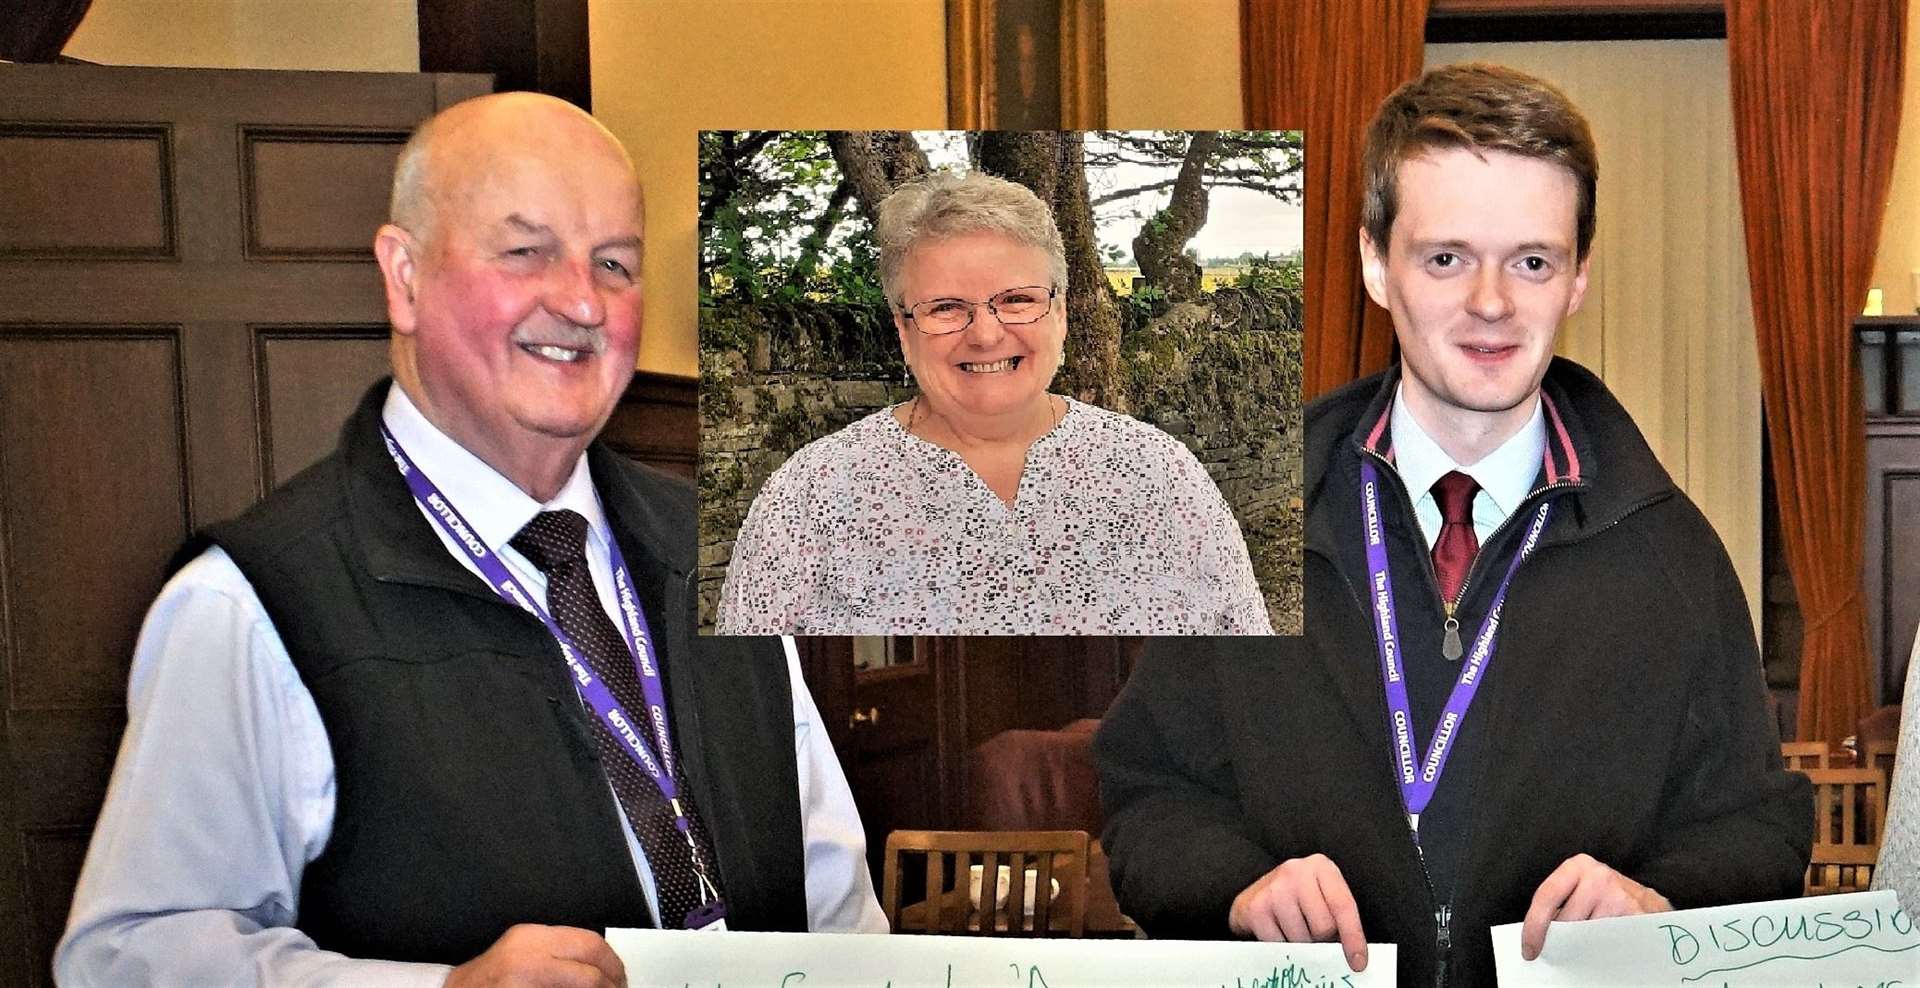 Wick and East Caithness councillors Willie Mackay (left) and Andrew Sinclair with inset picture of Jill Tilt. Questions were asked at a recent community council meeting regarding their attendance.